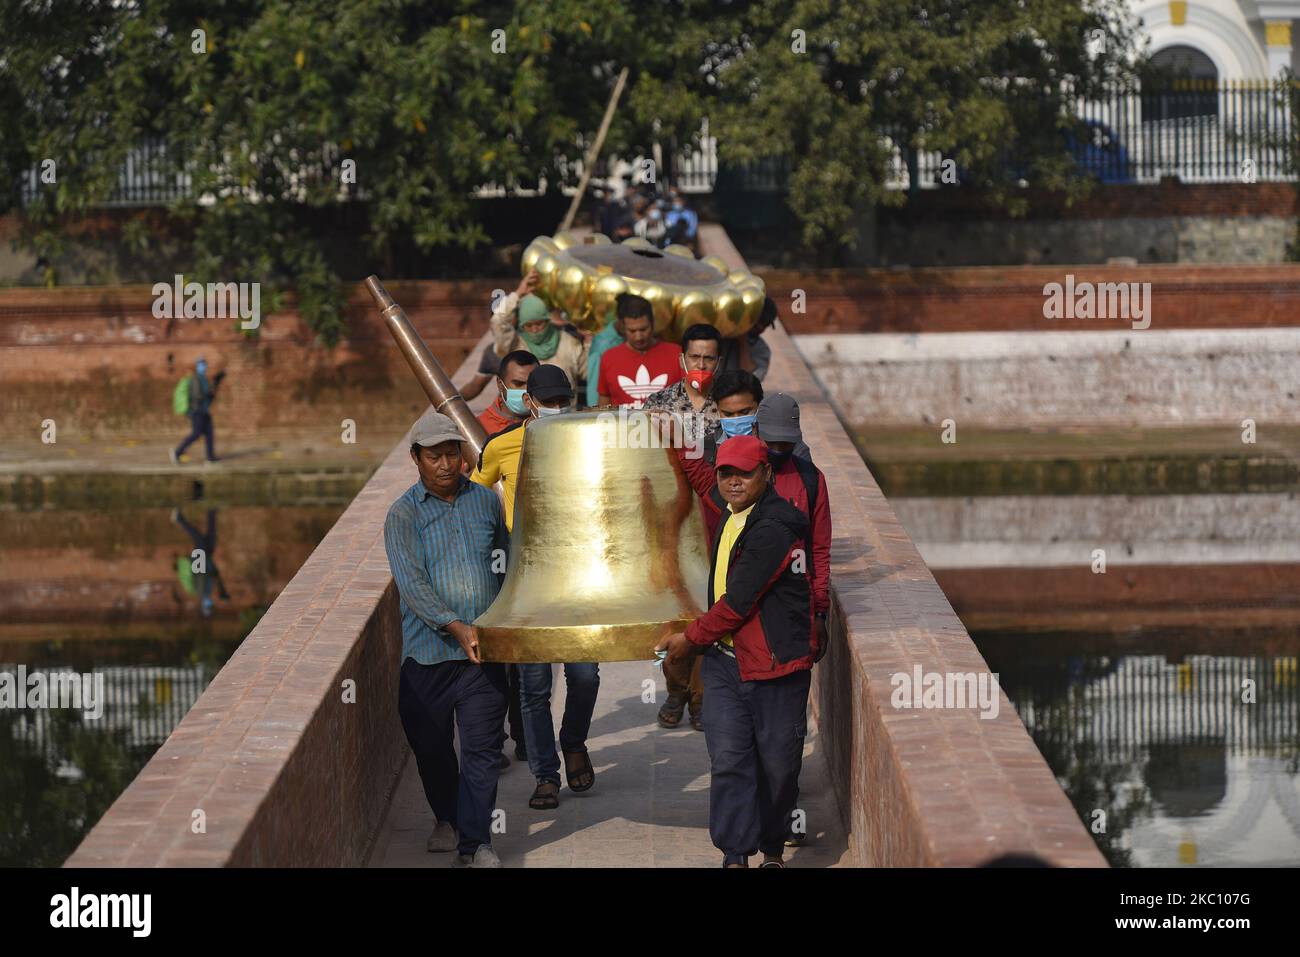 Nepalese people carrying pinnacle to put on the top of Rani Pokhari's Bal Gopaleshwar temple after the reconstruction at Kathmandu, Nepal on Thursday, October 1, 2020. The temple which destroyed during 2015 earthquake and recently rebuilt in the original Malla-era Shikar style. (Photo by Narayan Maharjan/NurPhoto) Stock Photo